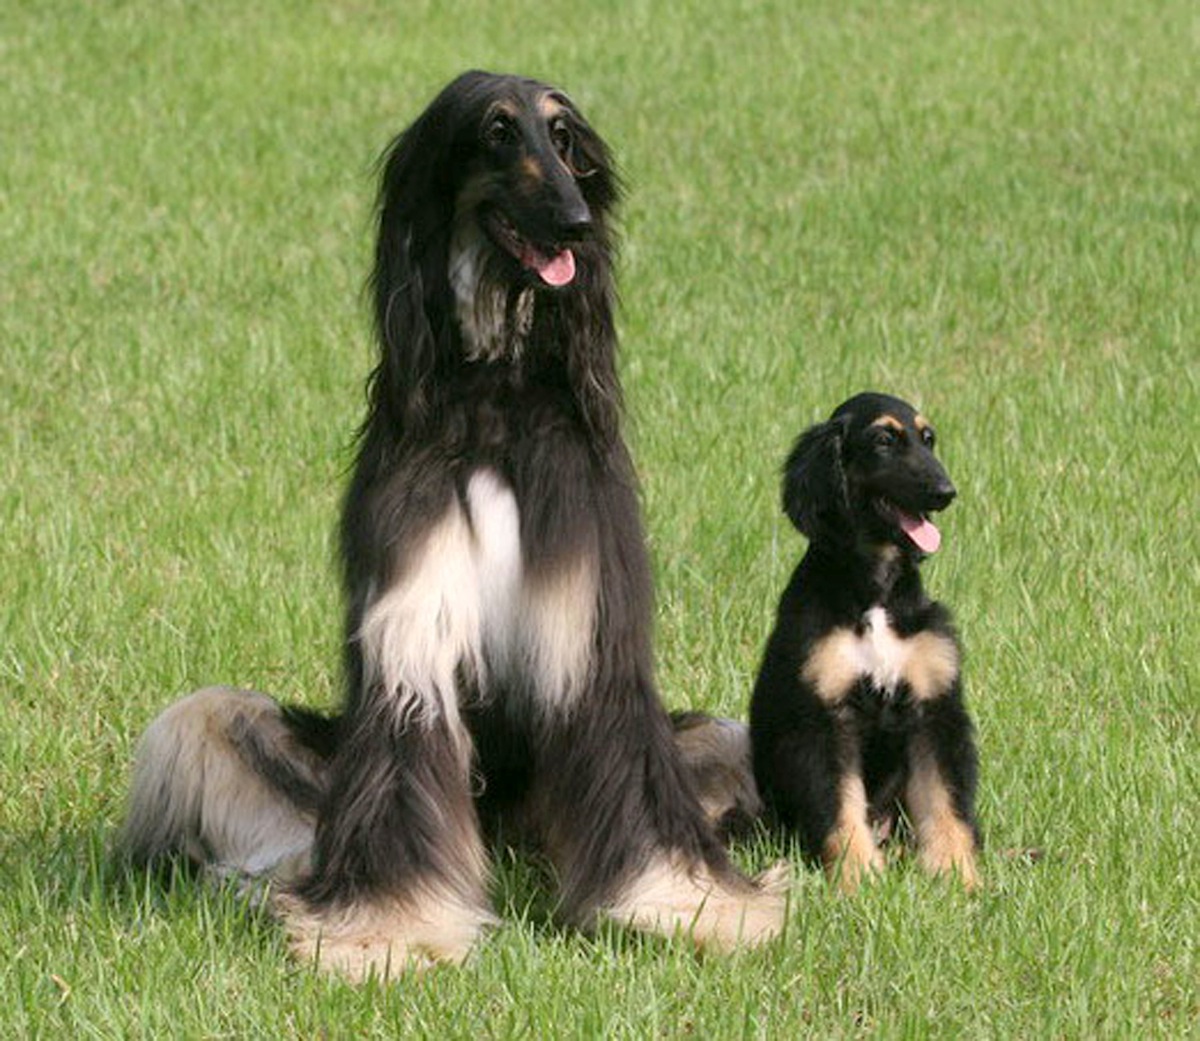 Snuppy, (R) the first successfully cloned Afghan hound, sits with his genetic father at the Seoul National University on Aug. 3, 2005 in Seoul (Getty Images)